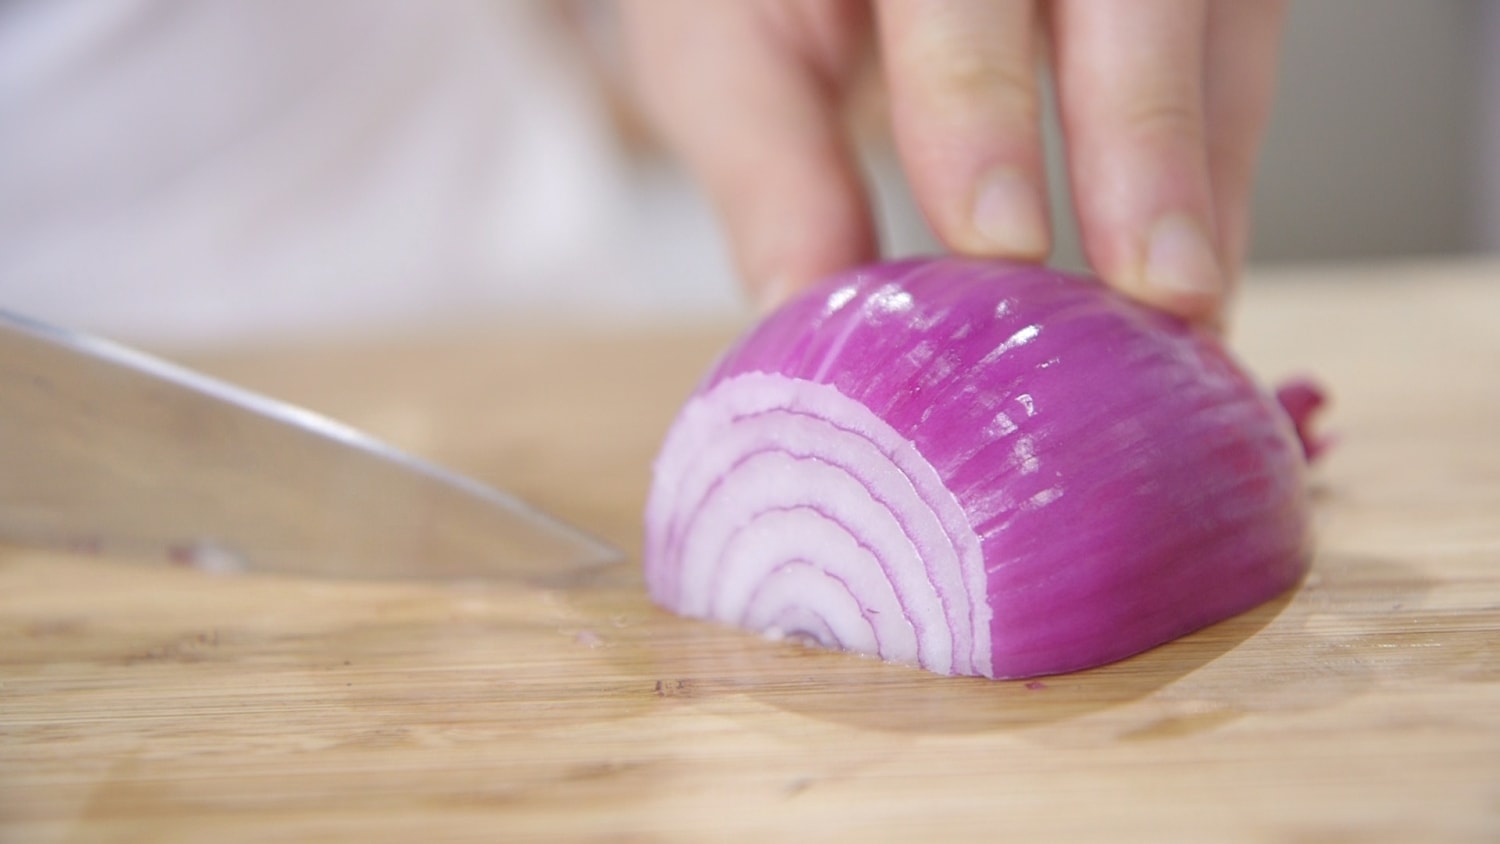 Best Onion Choppers: Top 5 Picks - The Kitchen Community